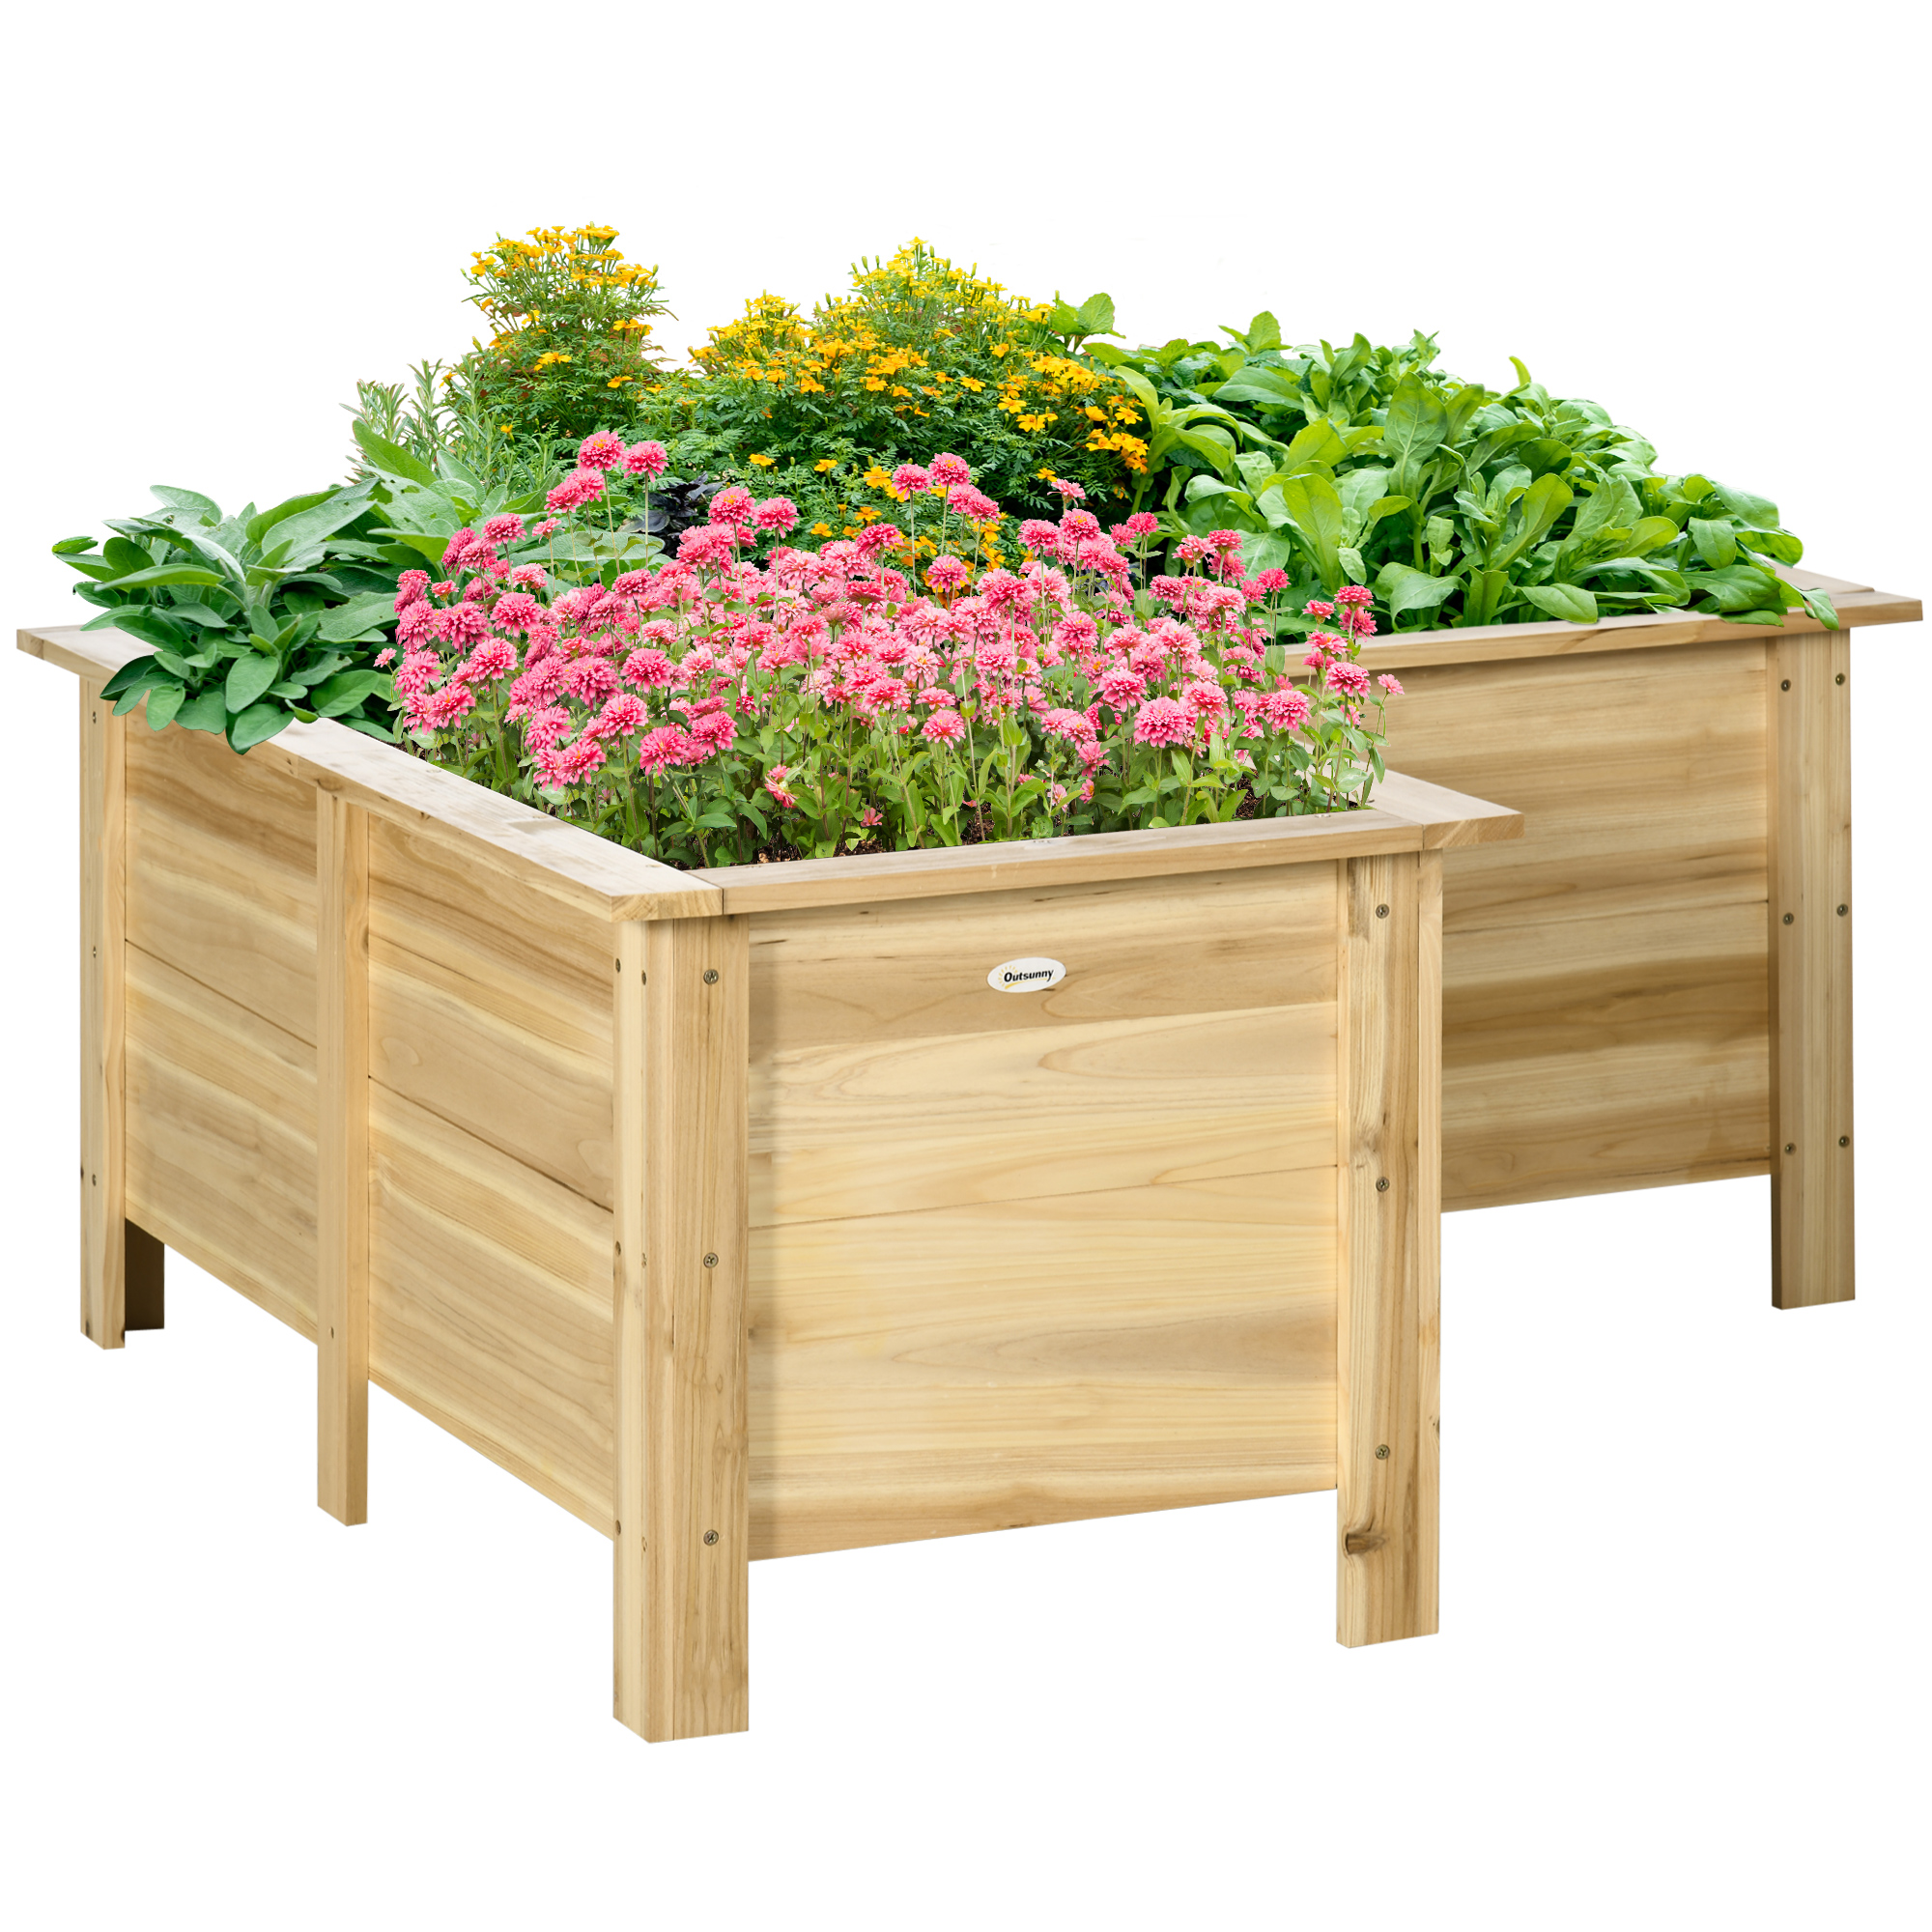 Raised Garden Bed Outdoor L-shaped, Wooden Planter Box